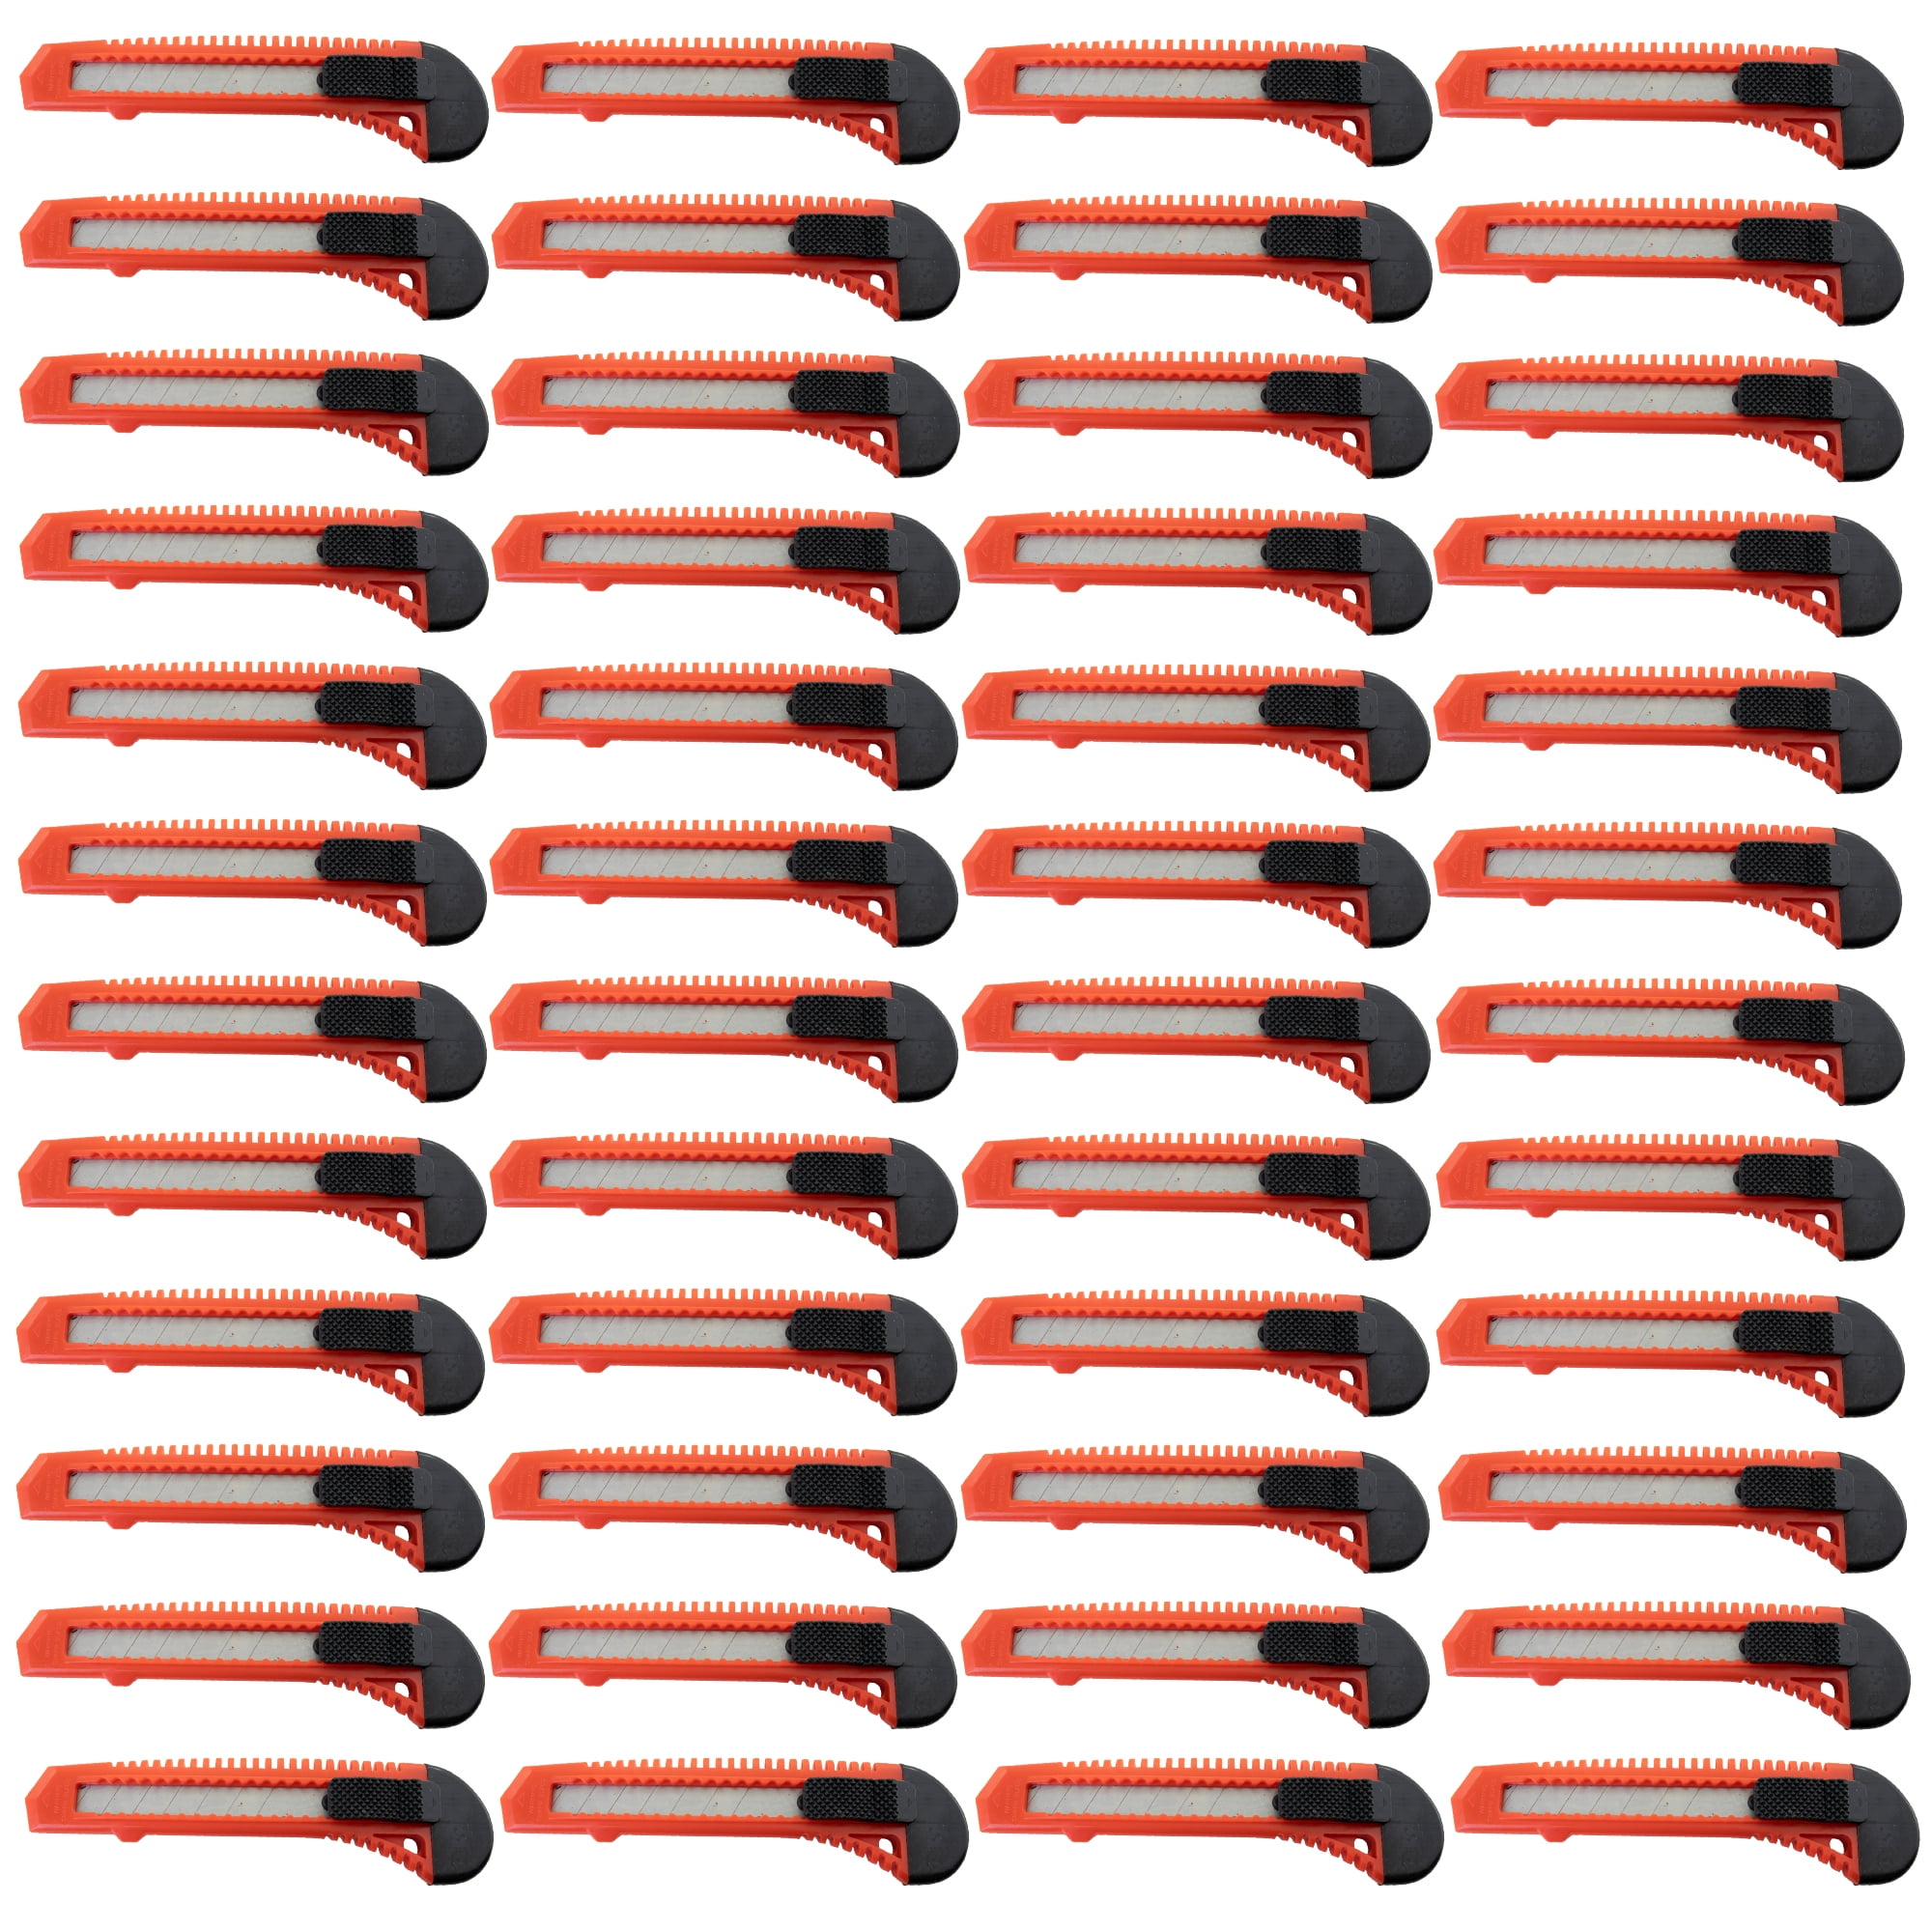 48 Pack Retractable Utility Knife Box Cutters Safety Lock Blade Snap Razor Knife